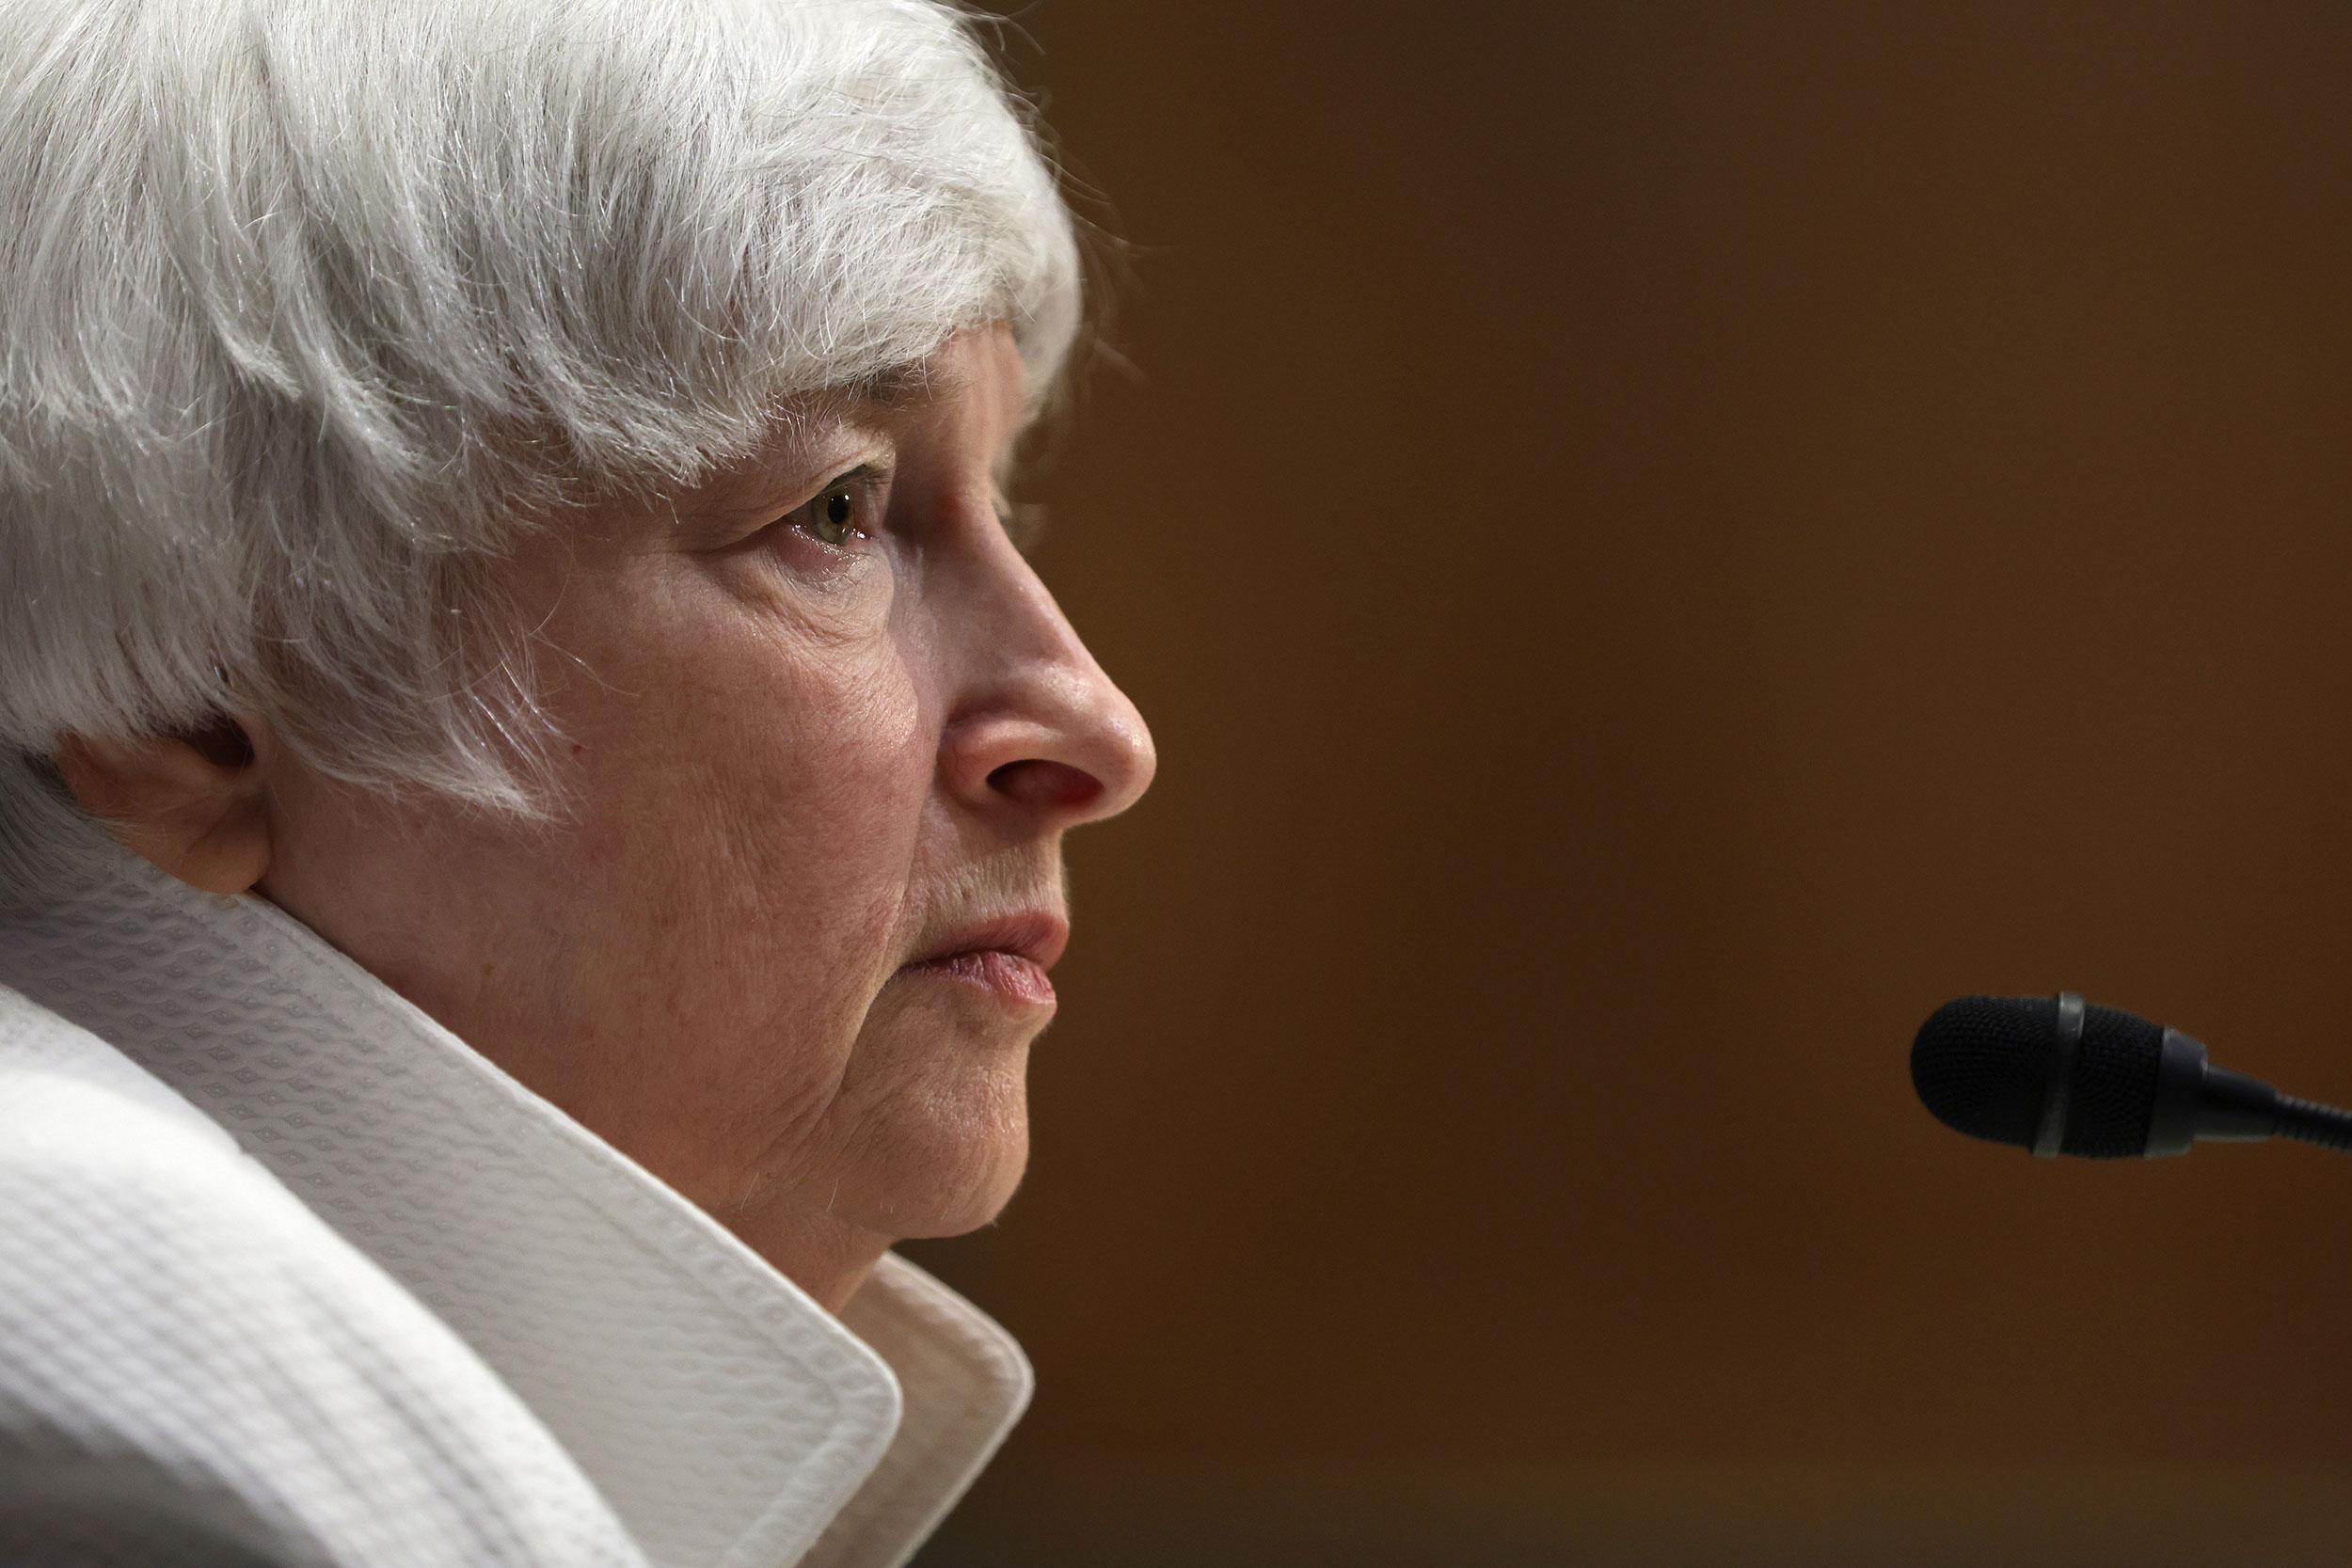 Yellen Directs Irs Not To Use New Funding To Increase Chances Of Audits